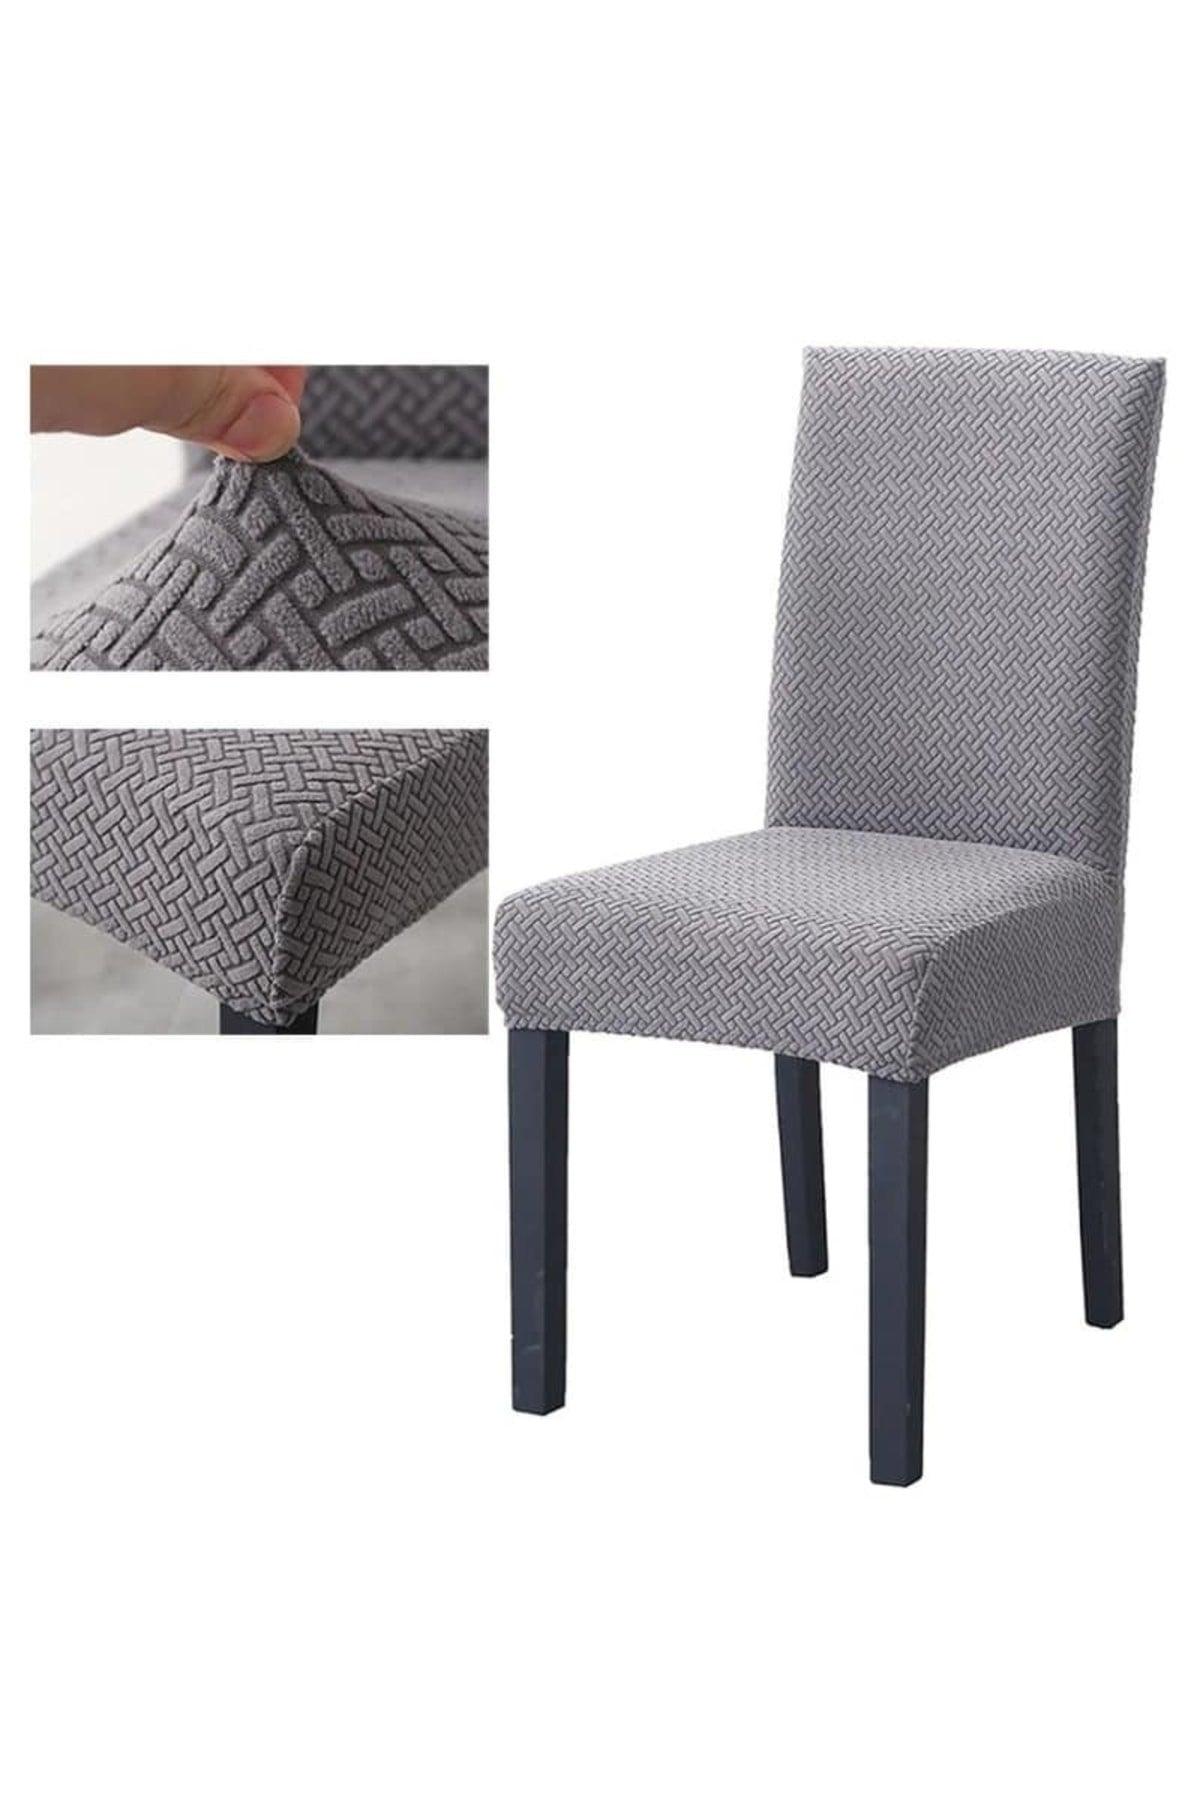 High Quality Chair Cover, Lycra, Washable 1 Piece Dark Gray Color - Swordslife